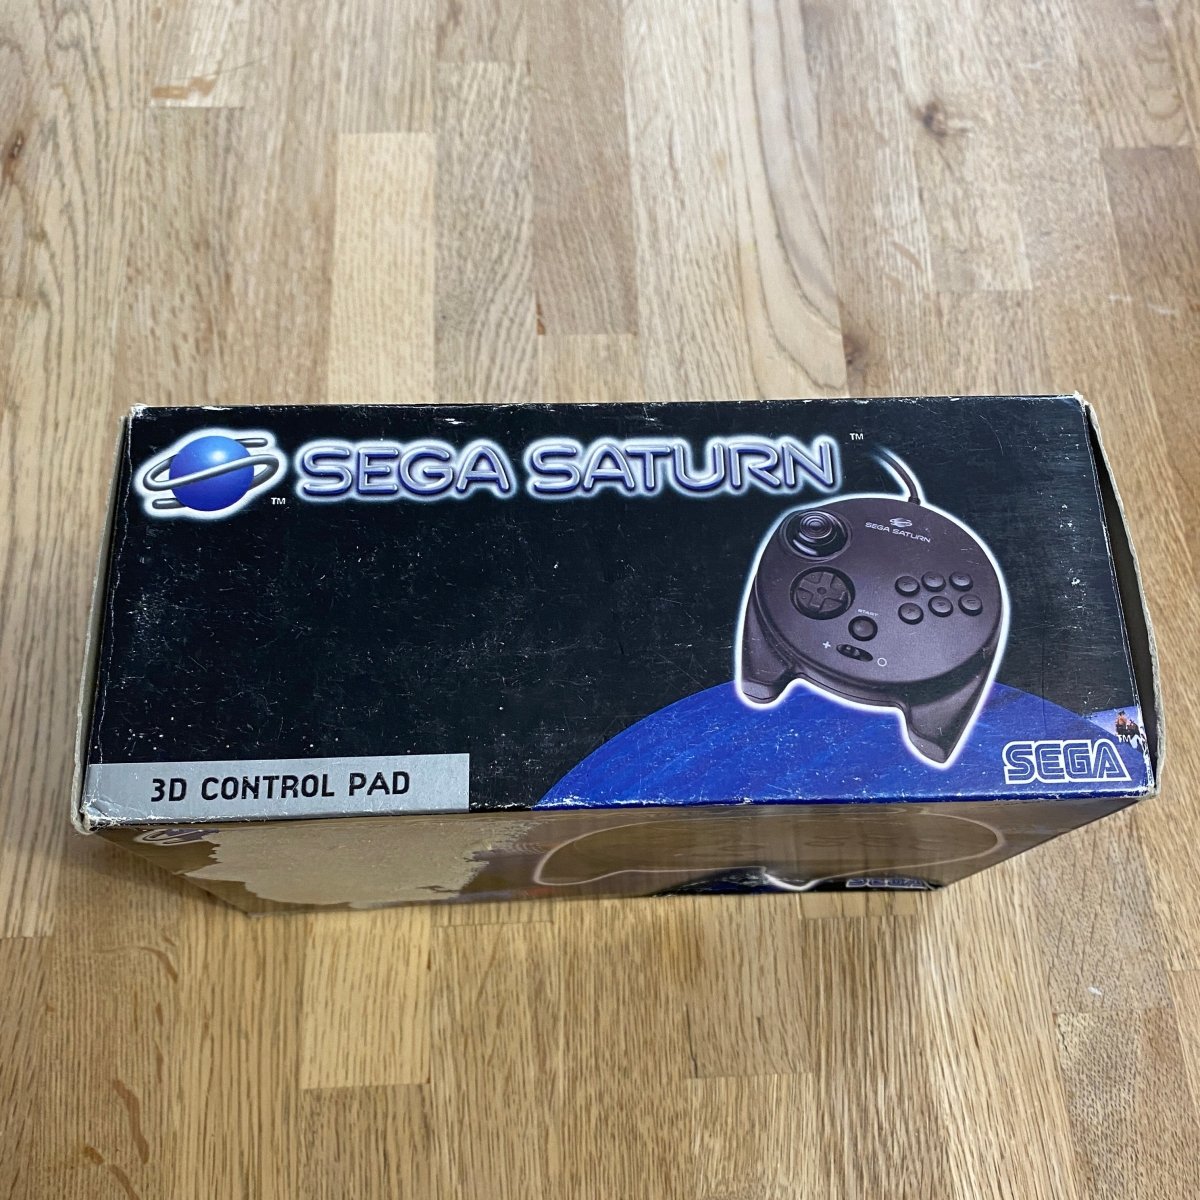 Buy 3d control pad boxed nights into dreams Sega saturn game complete -@ 8BitBeyond